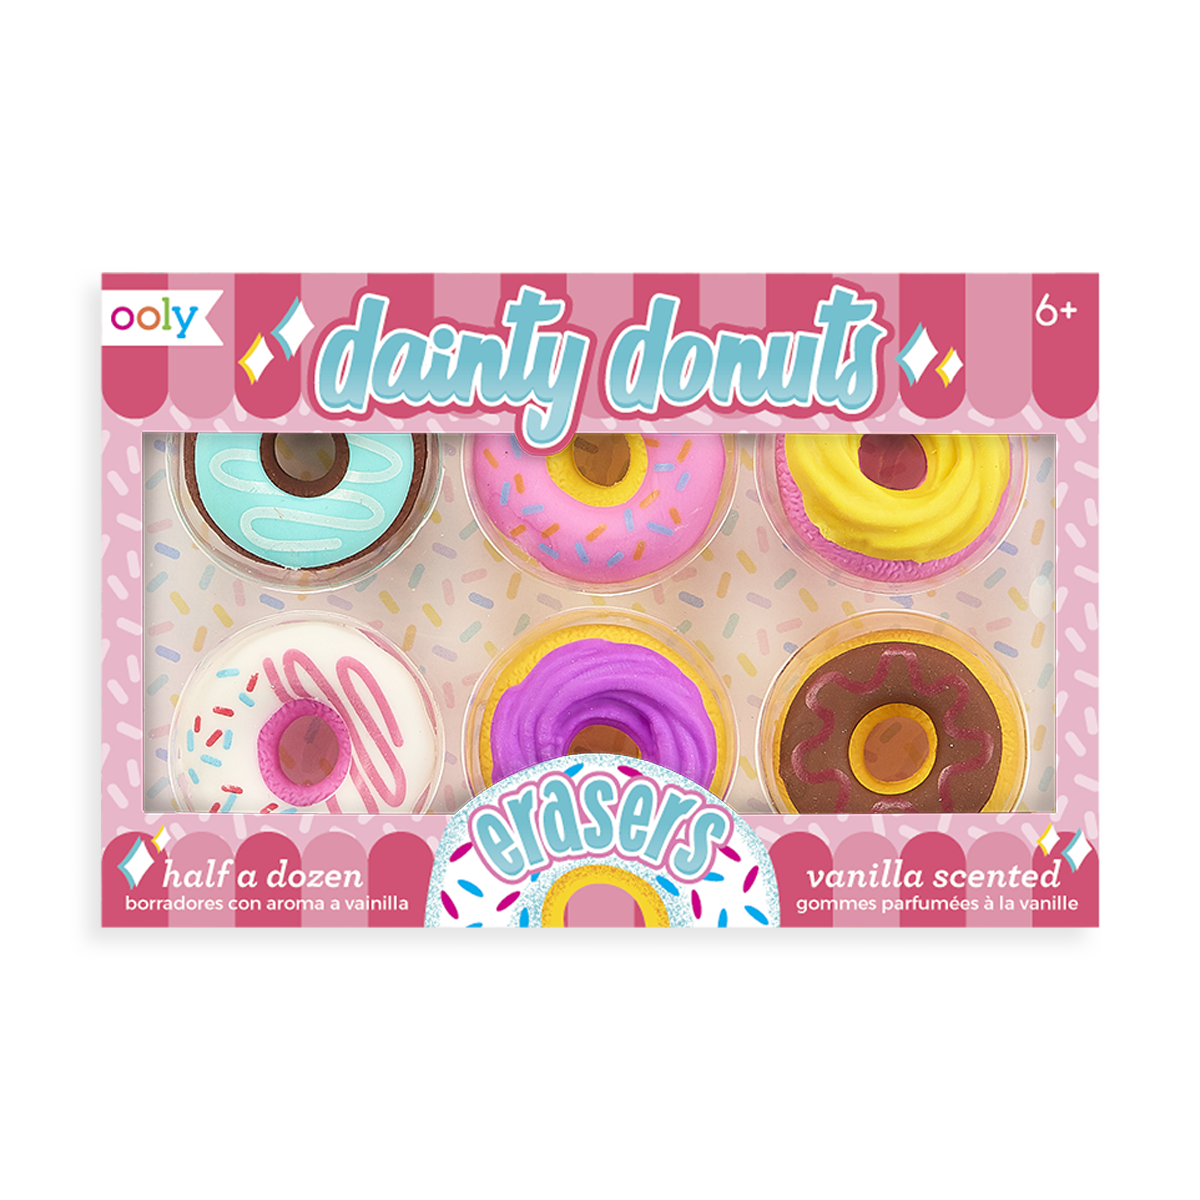 Dainty Donut pencil eraser set with 6 different styles and vanilla scented